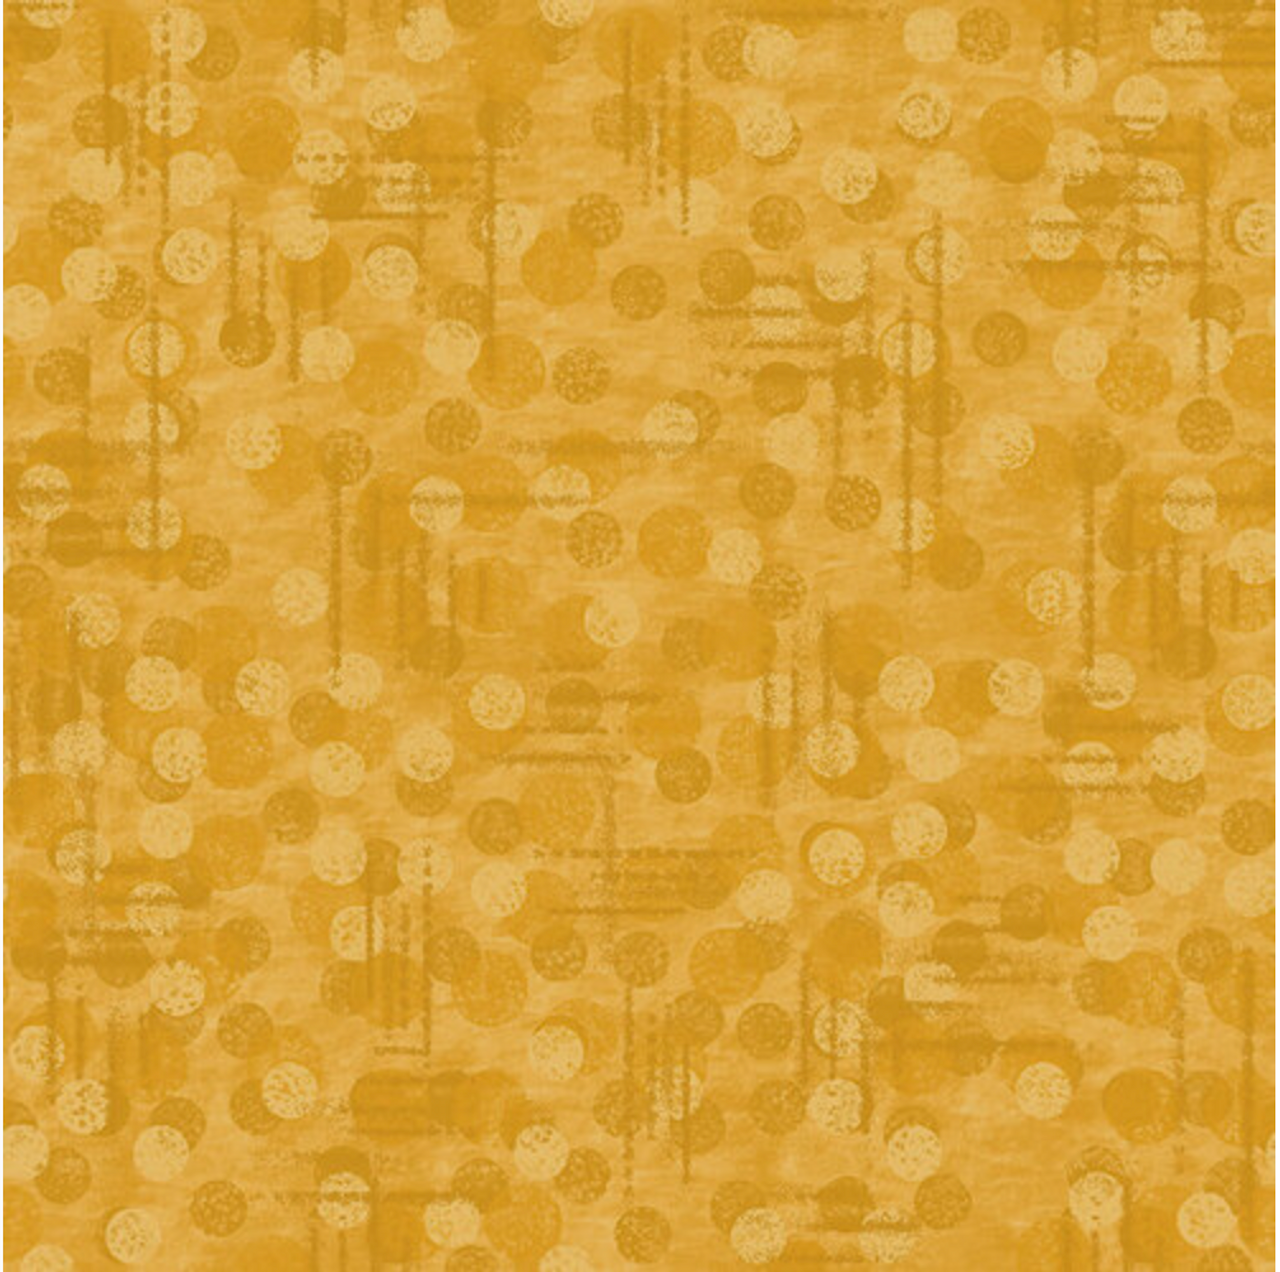 Blank Quilting Jot Dot Tonal Texture Gold Cotton Fabric By The Yard